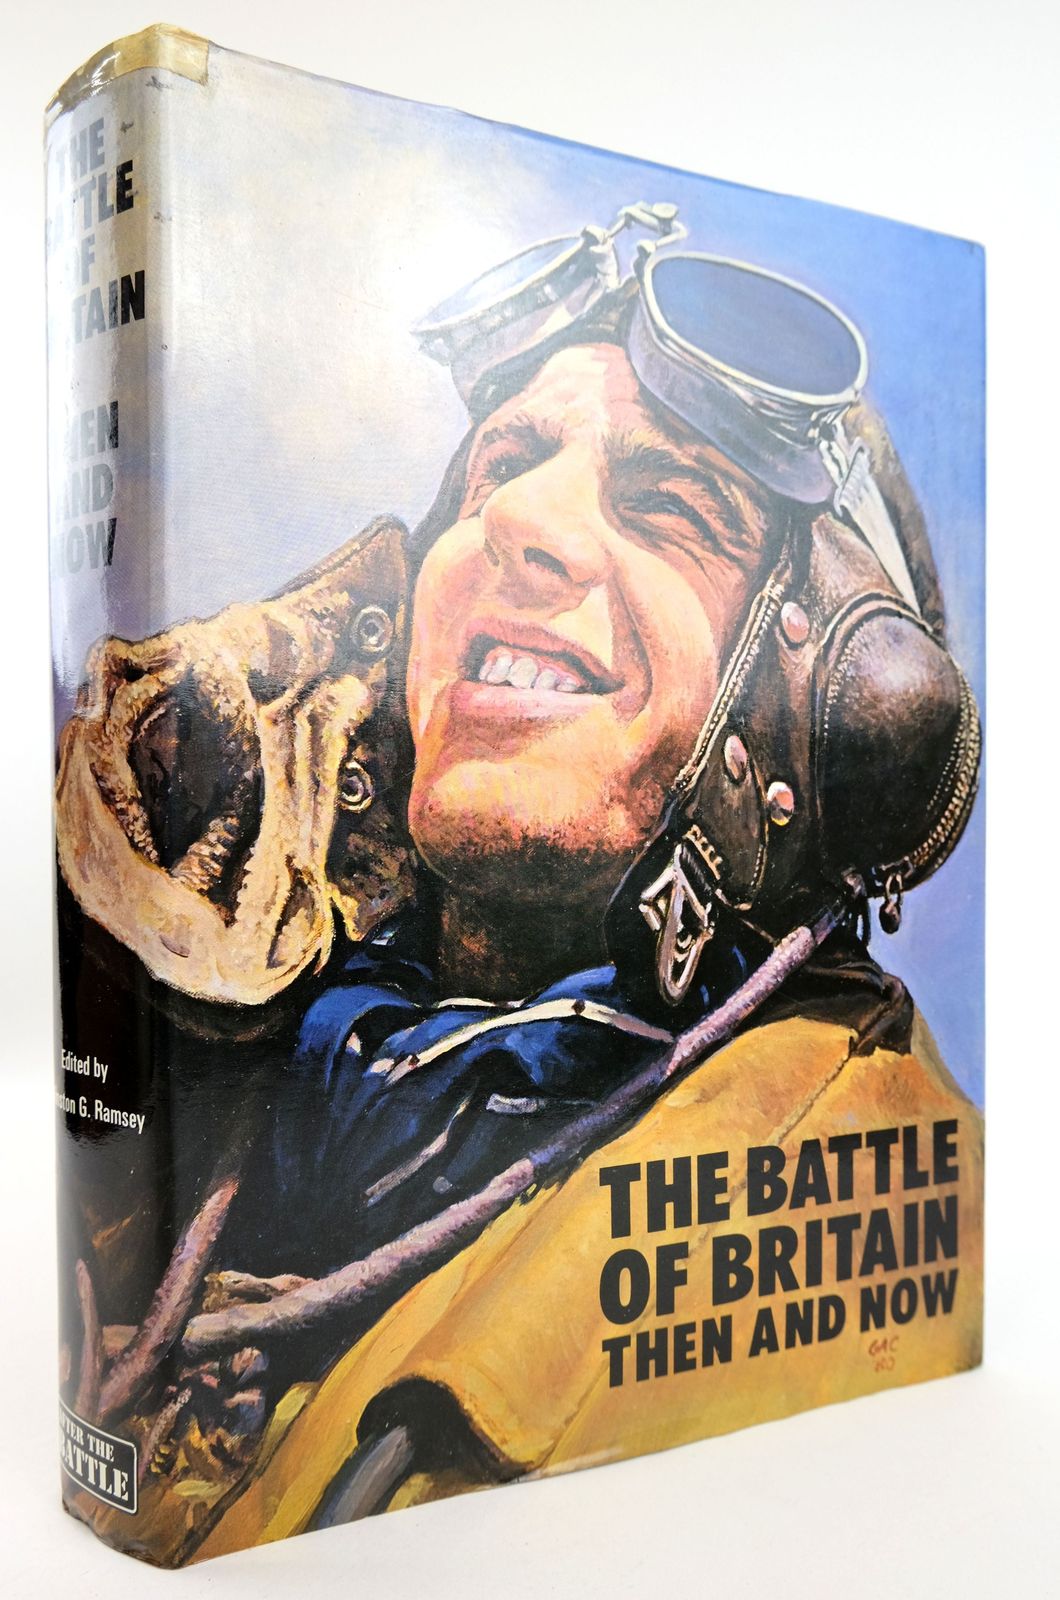 Photo of THE BATTLE OF BRITAIN THEN AND NOW written by Ramsey, Winston G. published by Battle of Britain Prints International Ltd. (STOCK CODE: 1819013)  for sale by Stella & Rose's Books